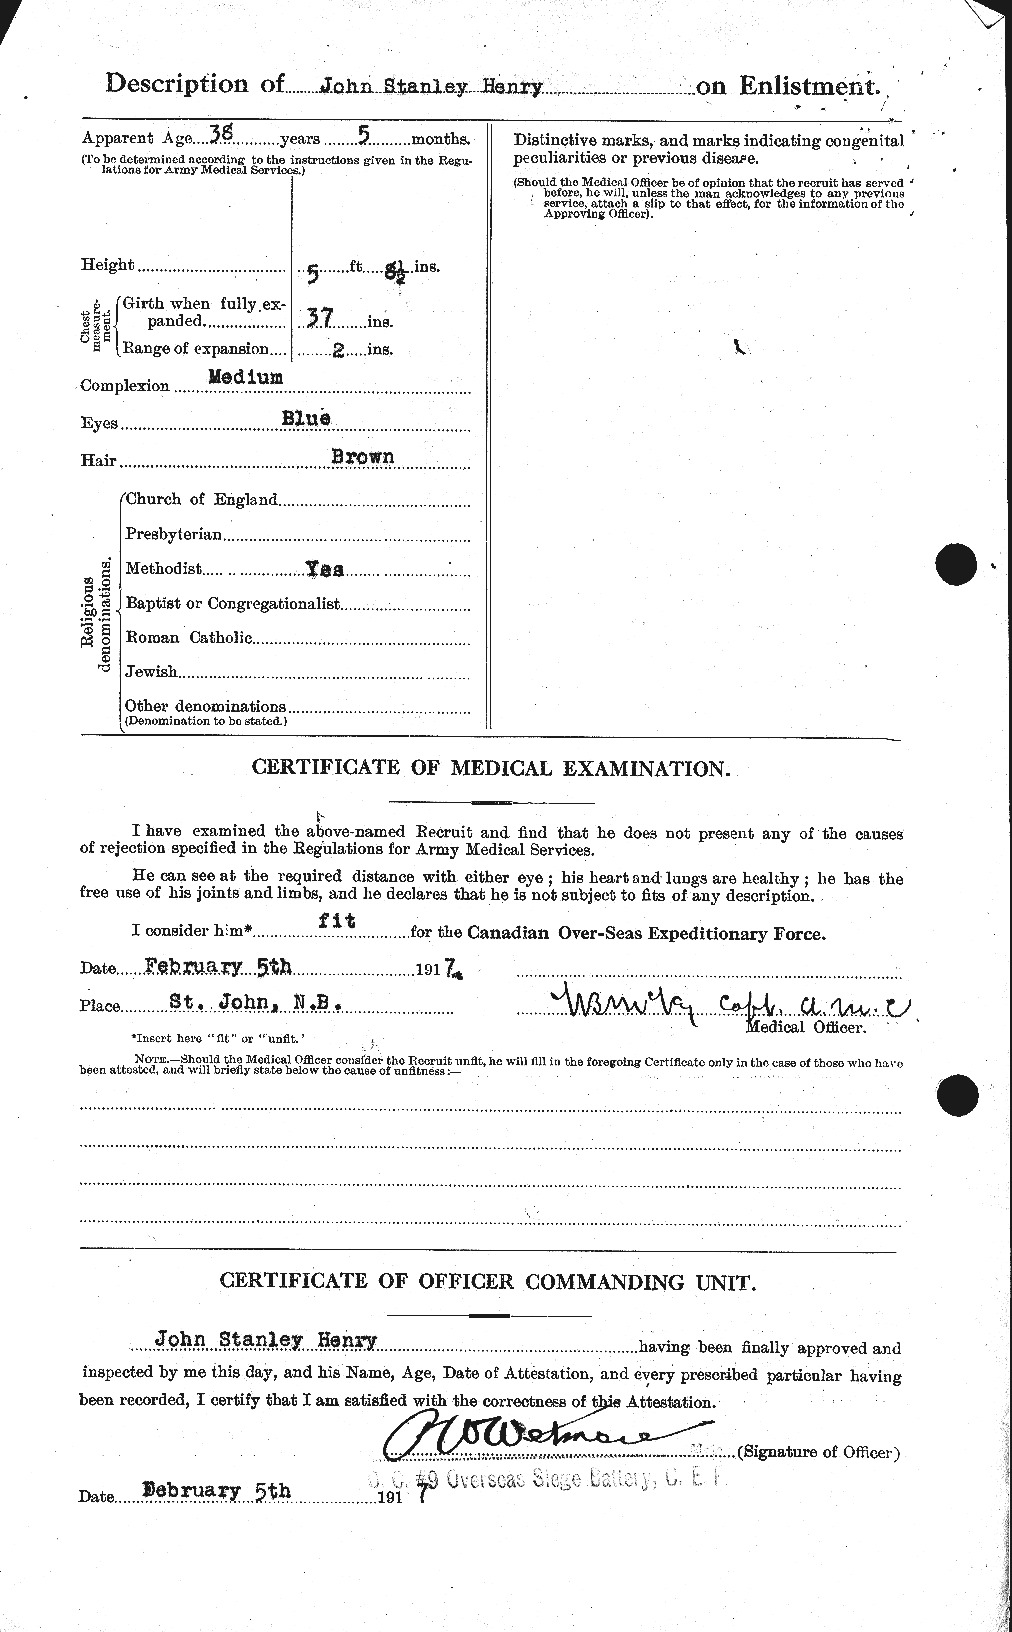 Personnel Records of the First World War - CEF 387632b